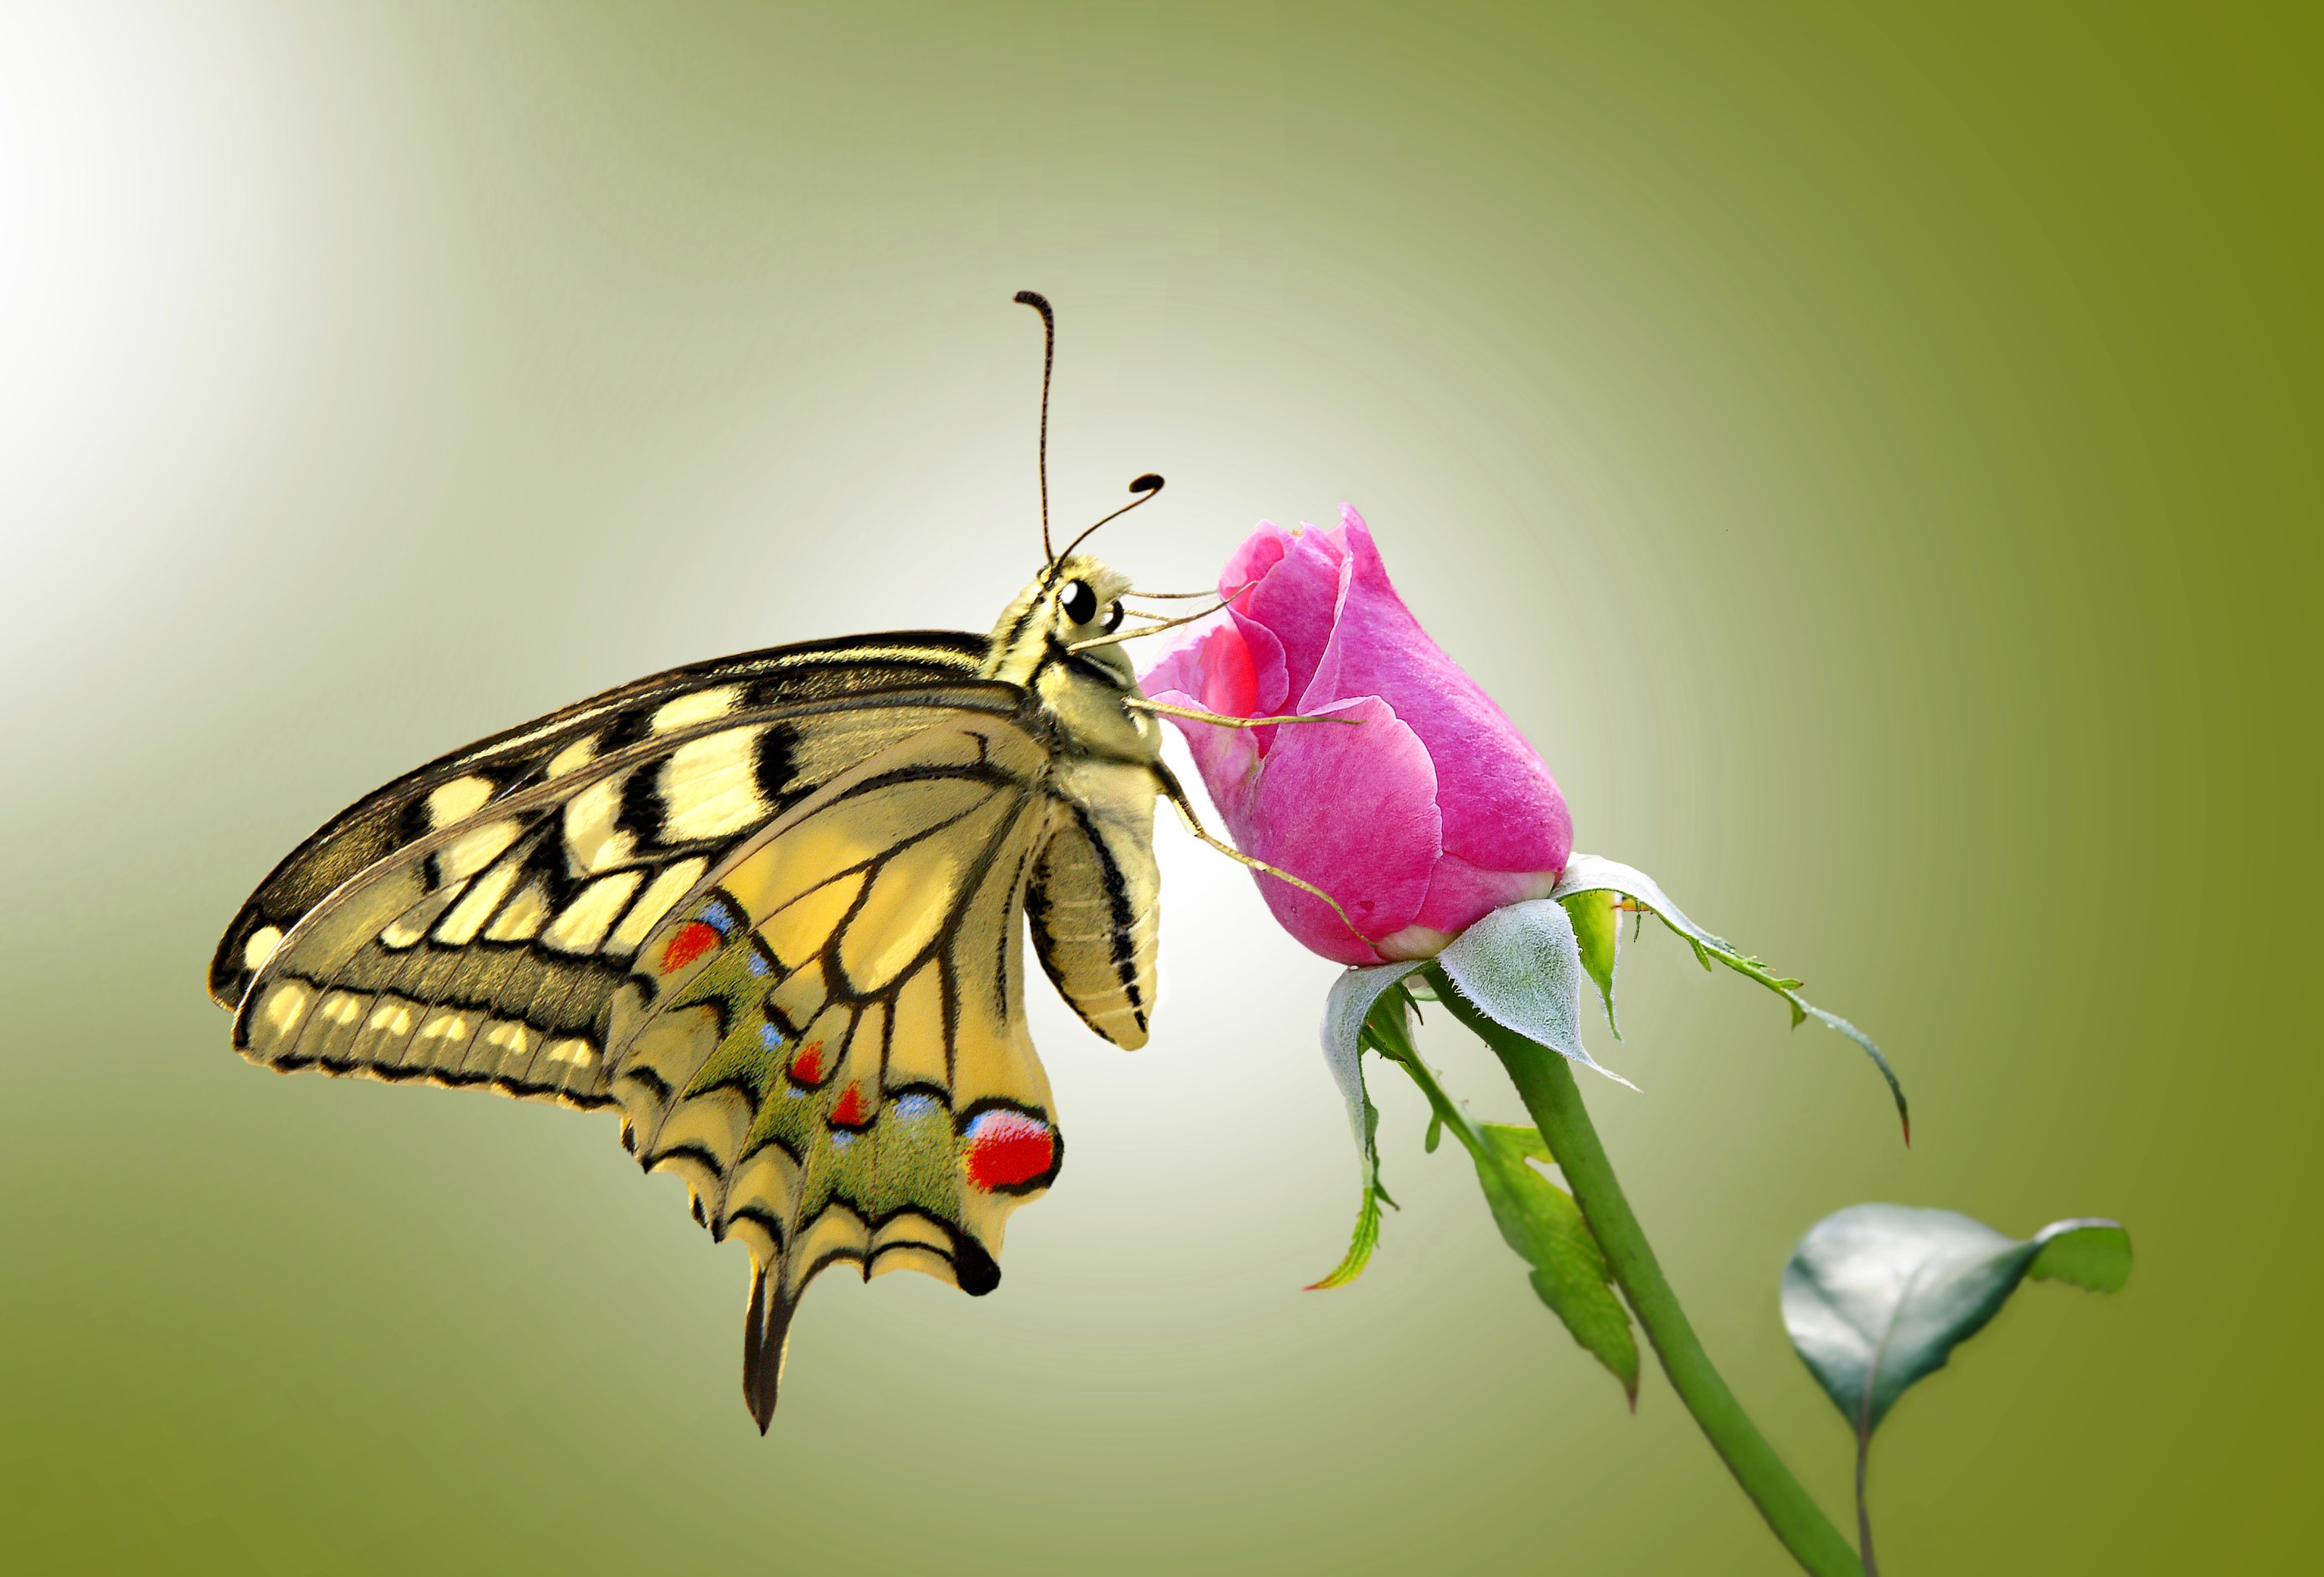 flower, insect, insects, animal, swallowtail butterfly, butterfly, nature